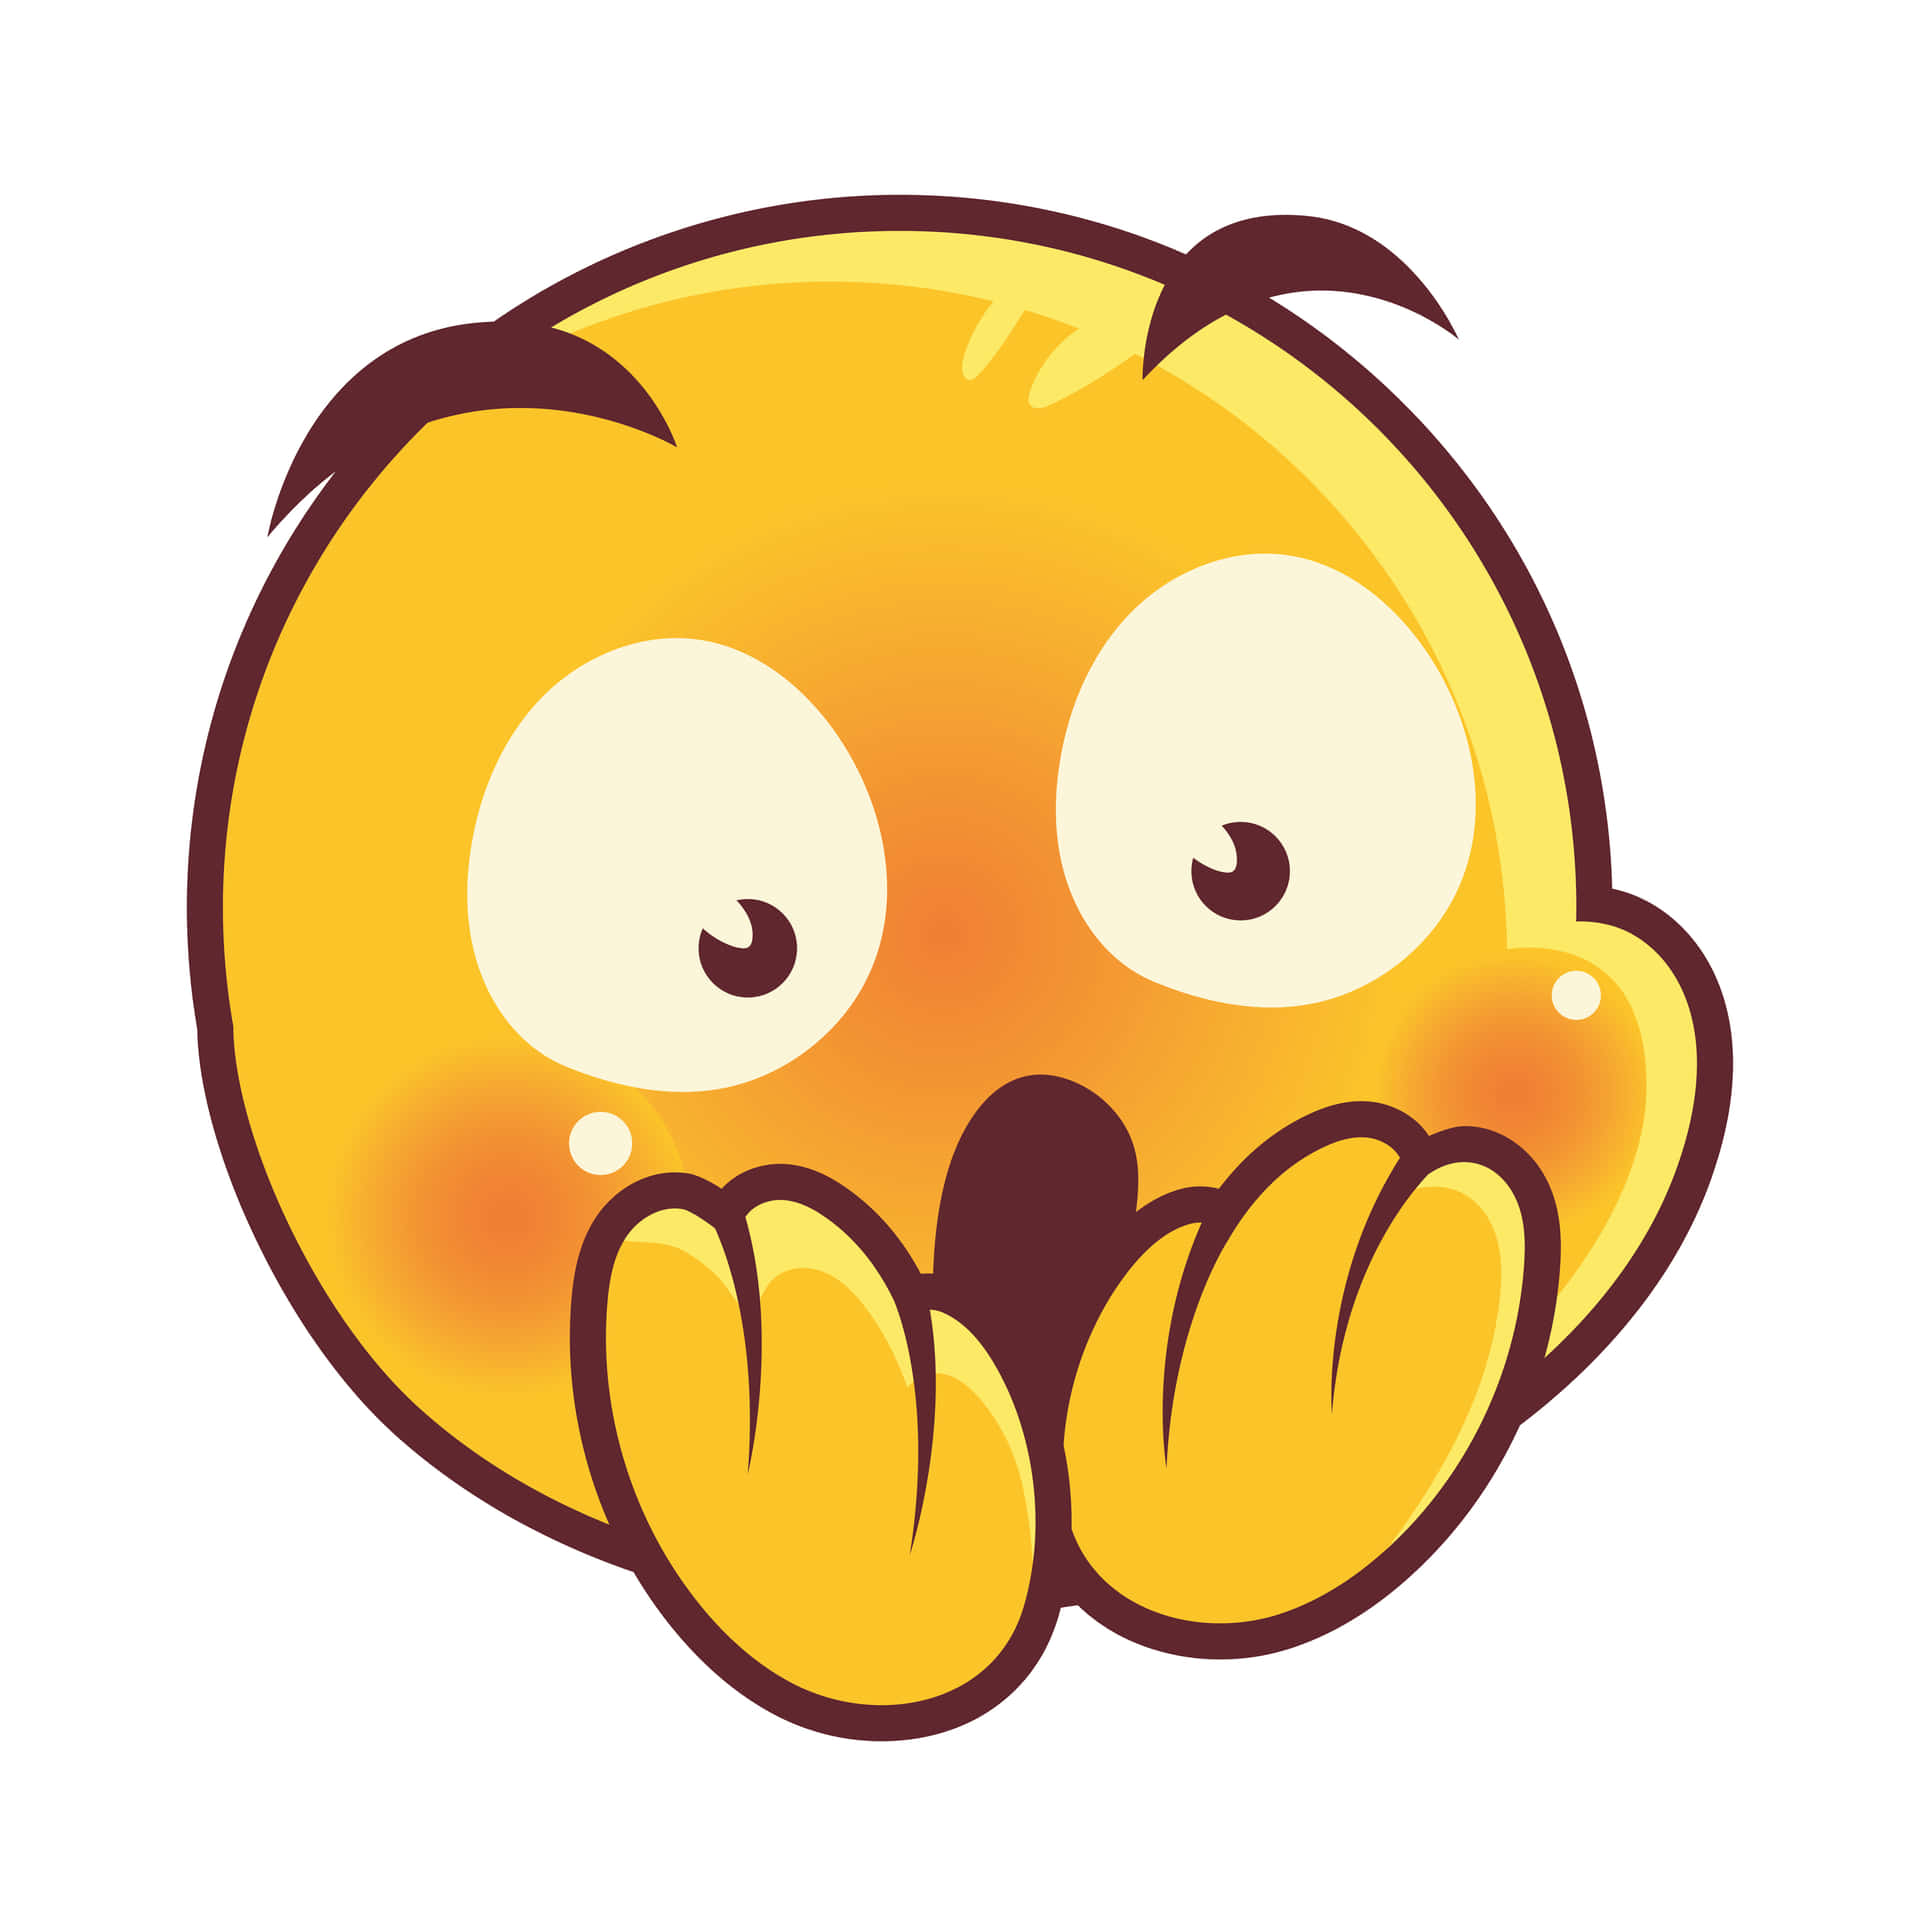 Download Funny Discord Profile Pictures 3333 x 3333 